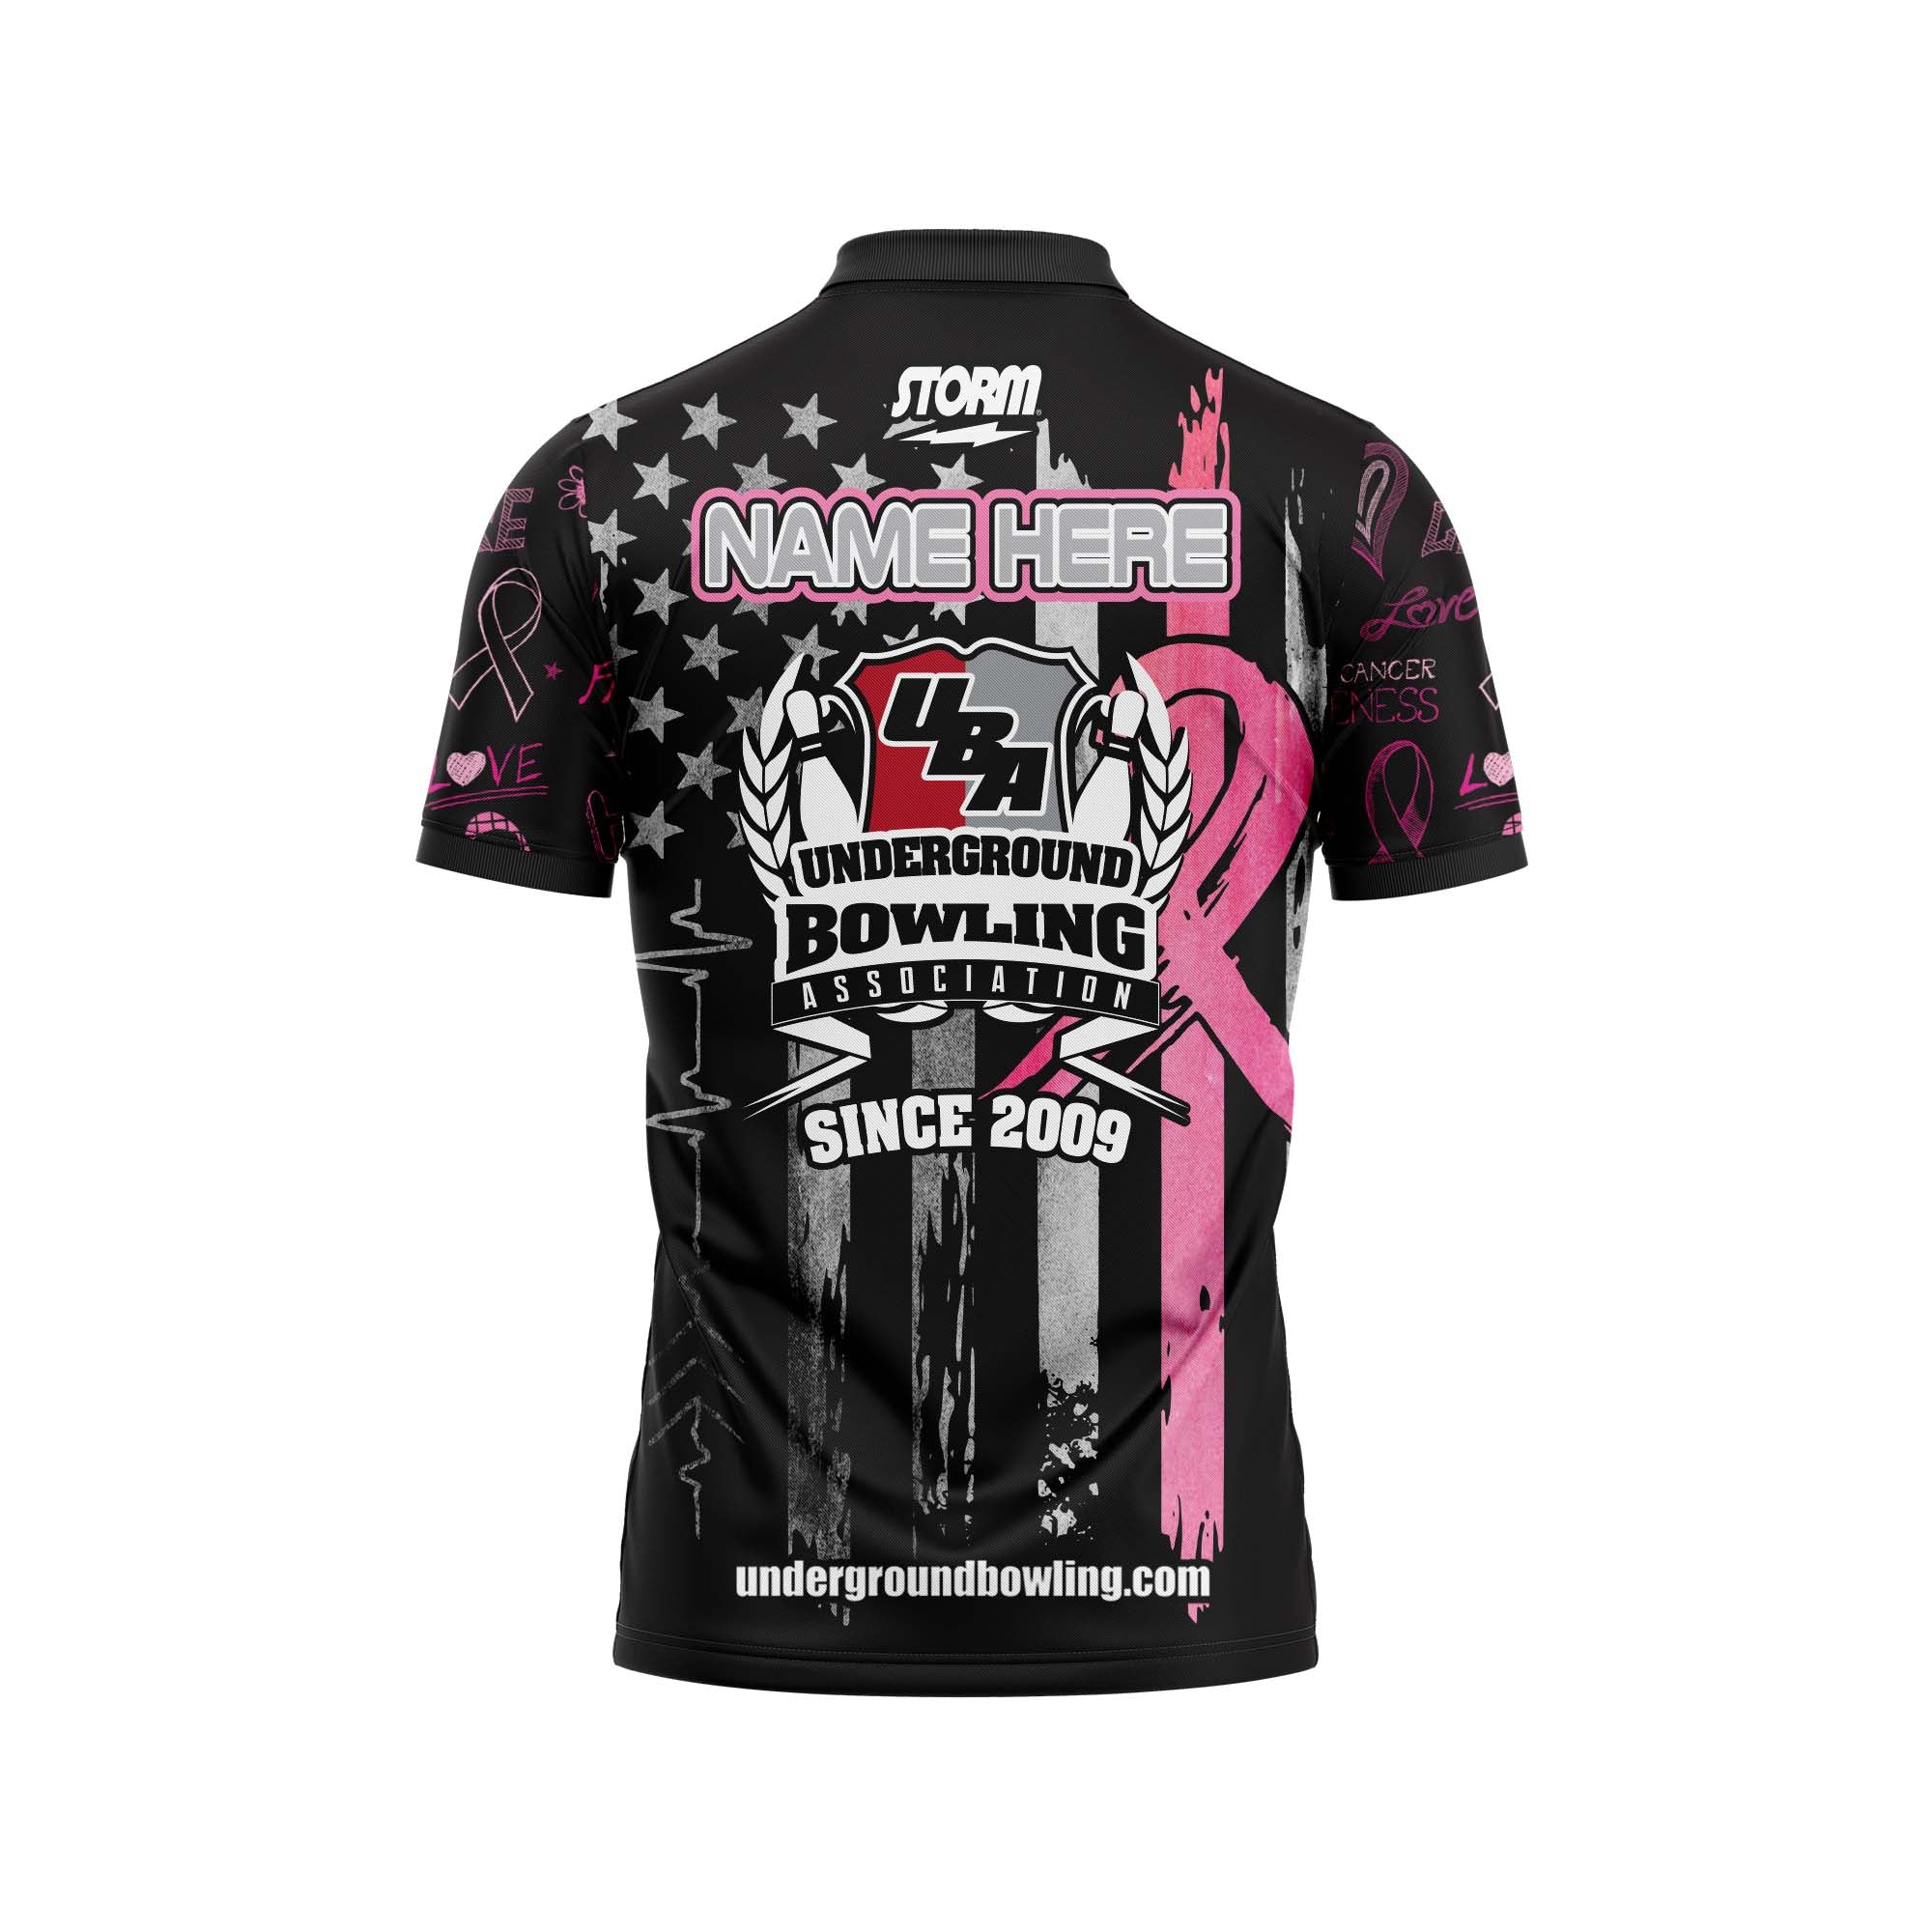 Outkasts Breast Cancer Pattern Jersey